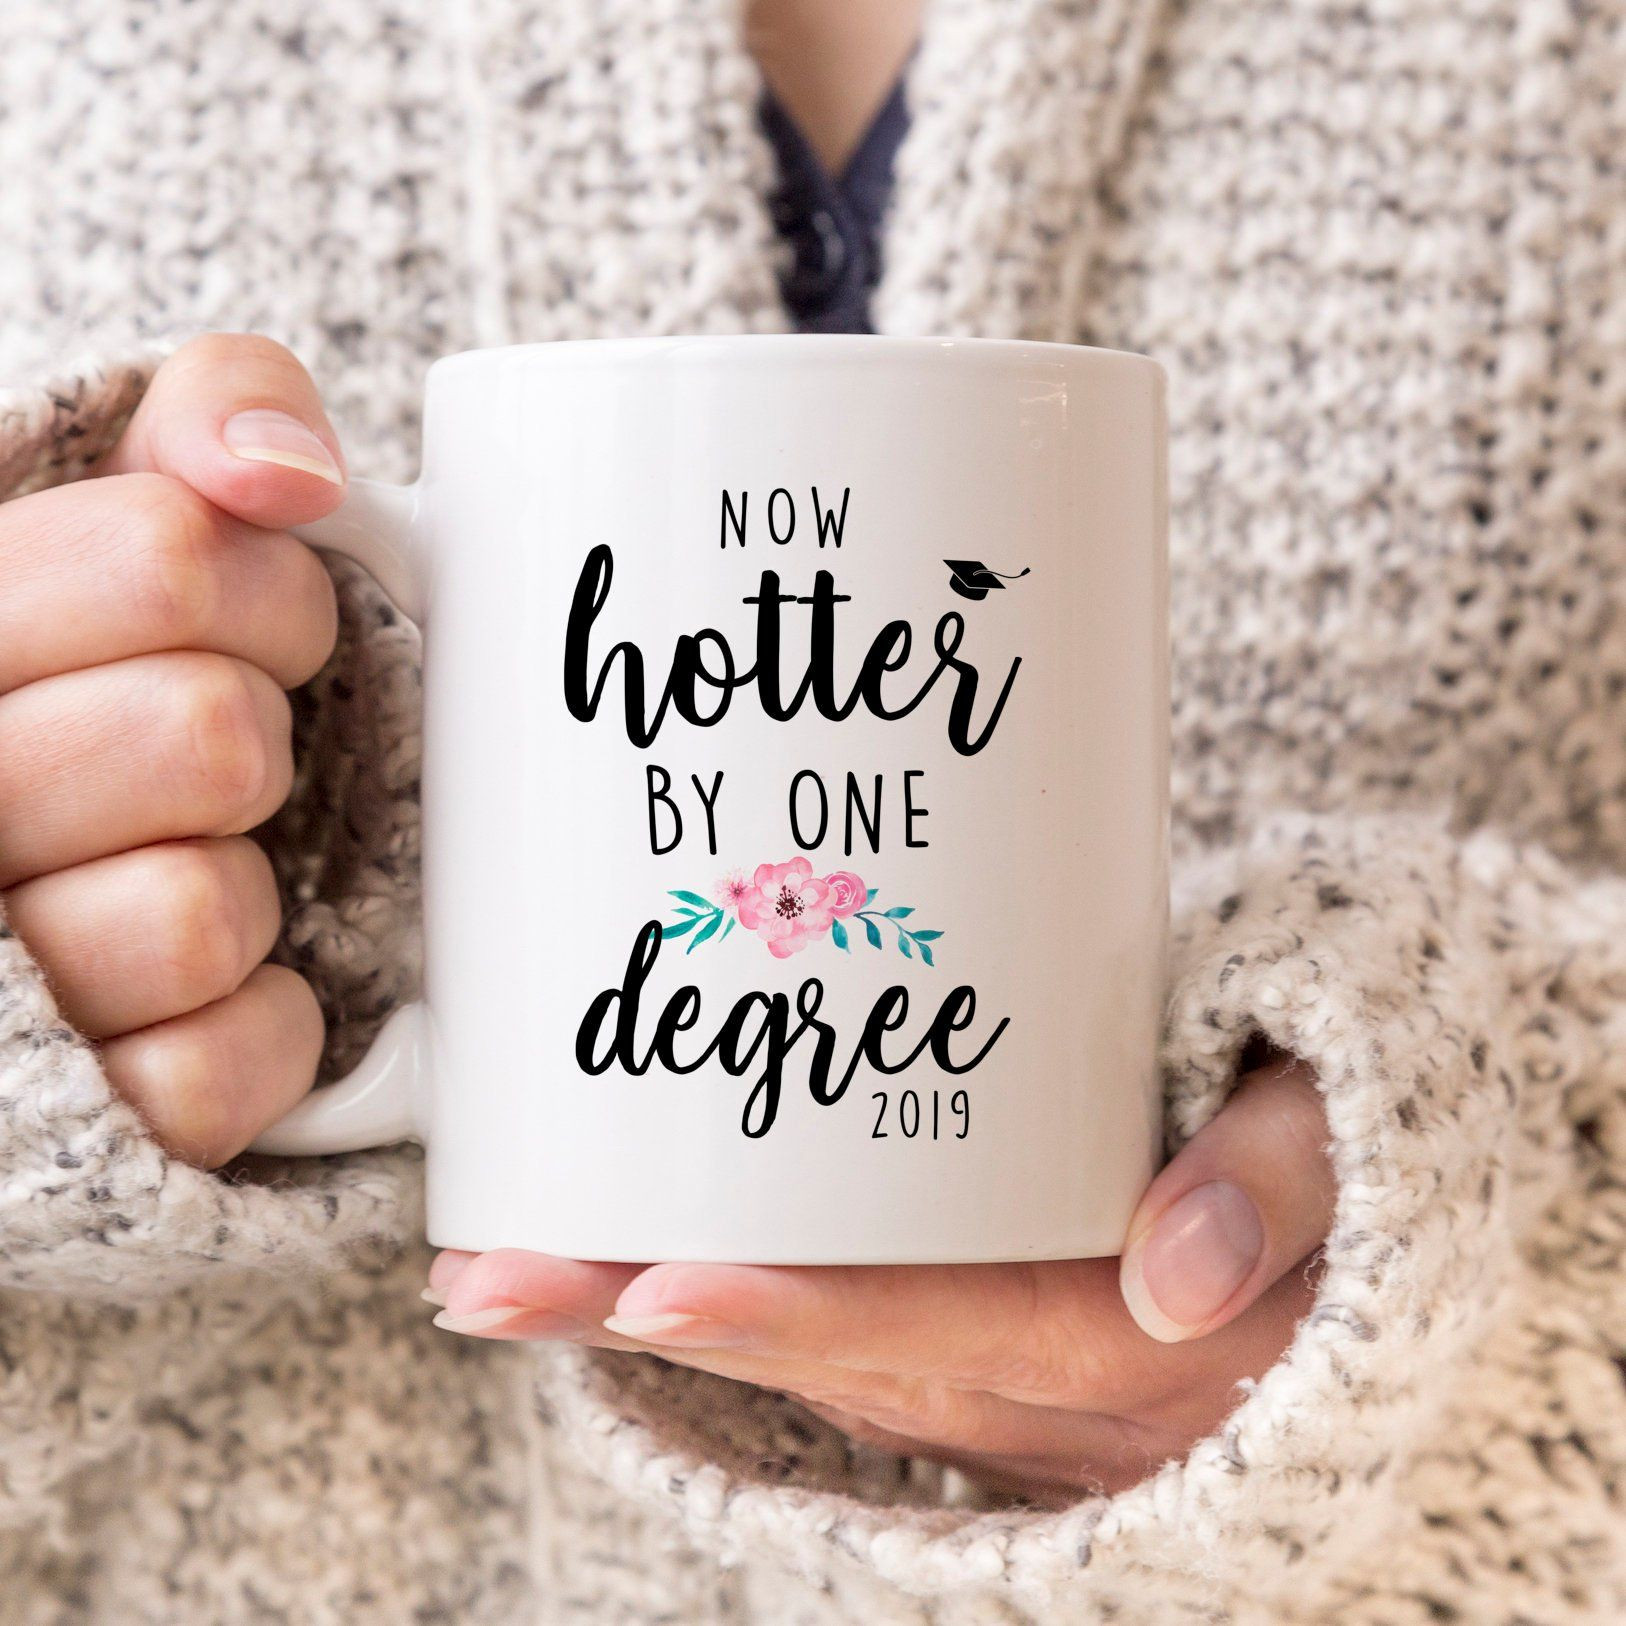 Graduation Gift Ideas For Her Masters Degree
 Funny Graduation Gift For Her Now Hotter By e Degree